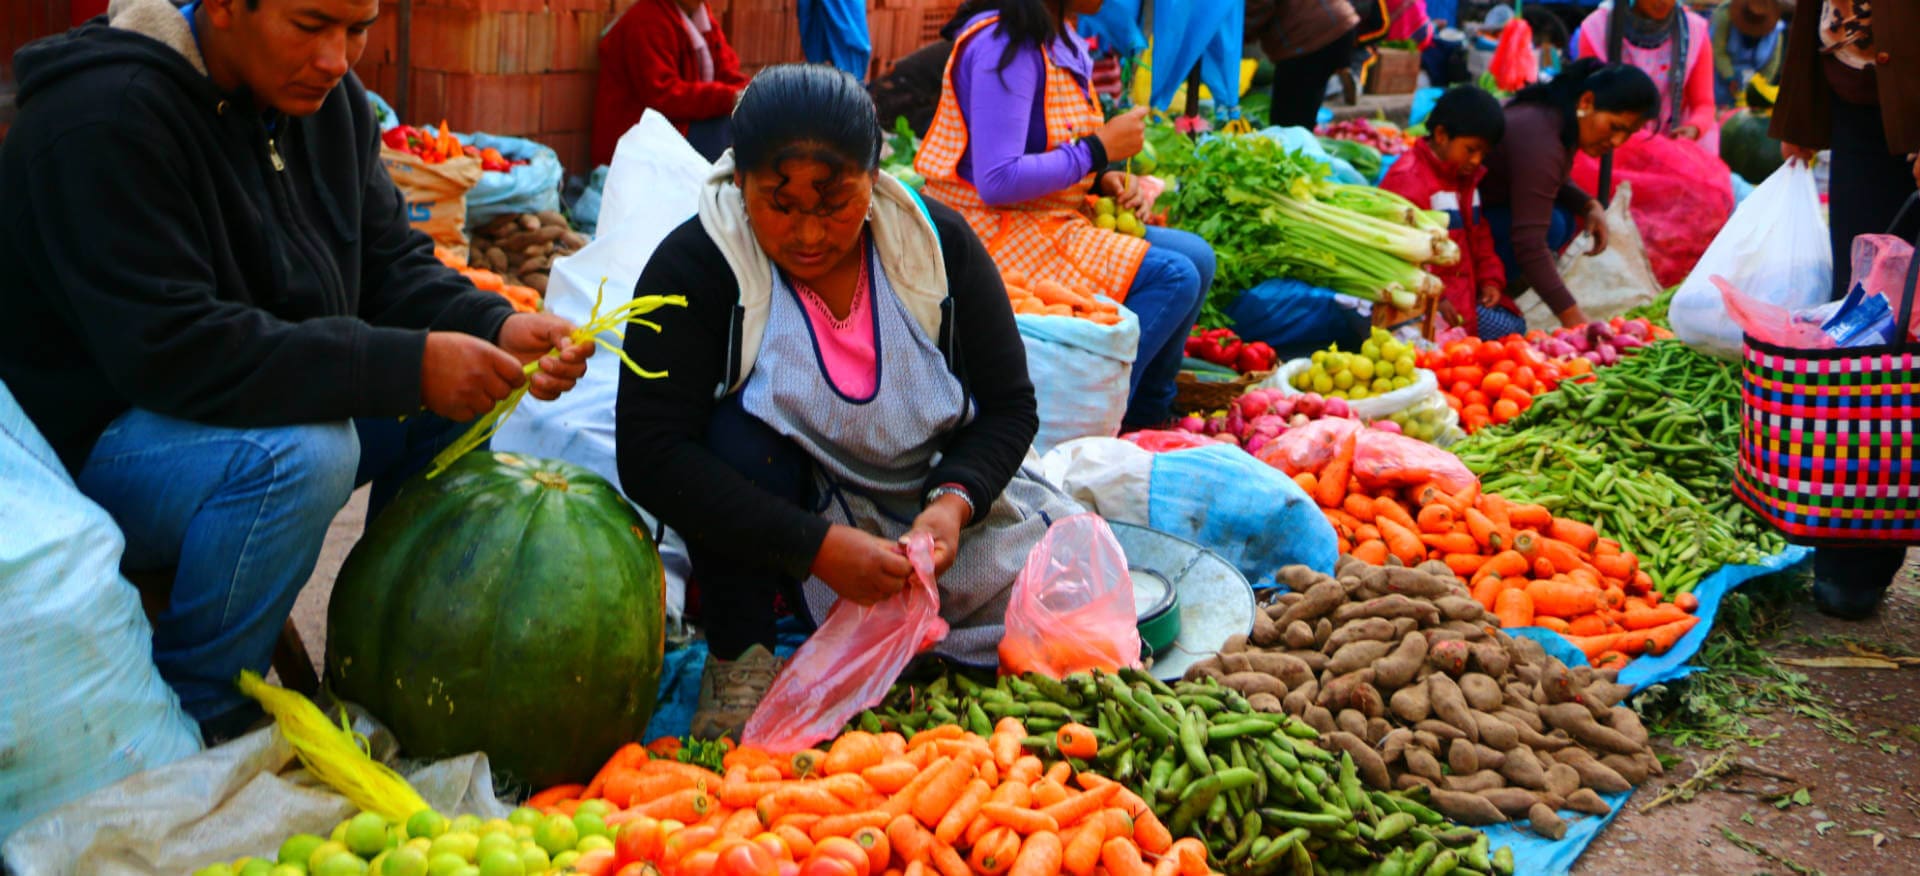 A woman sitting in front of many vegetables.